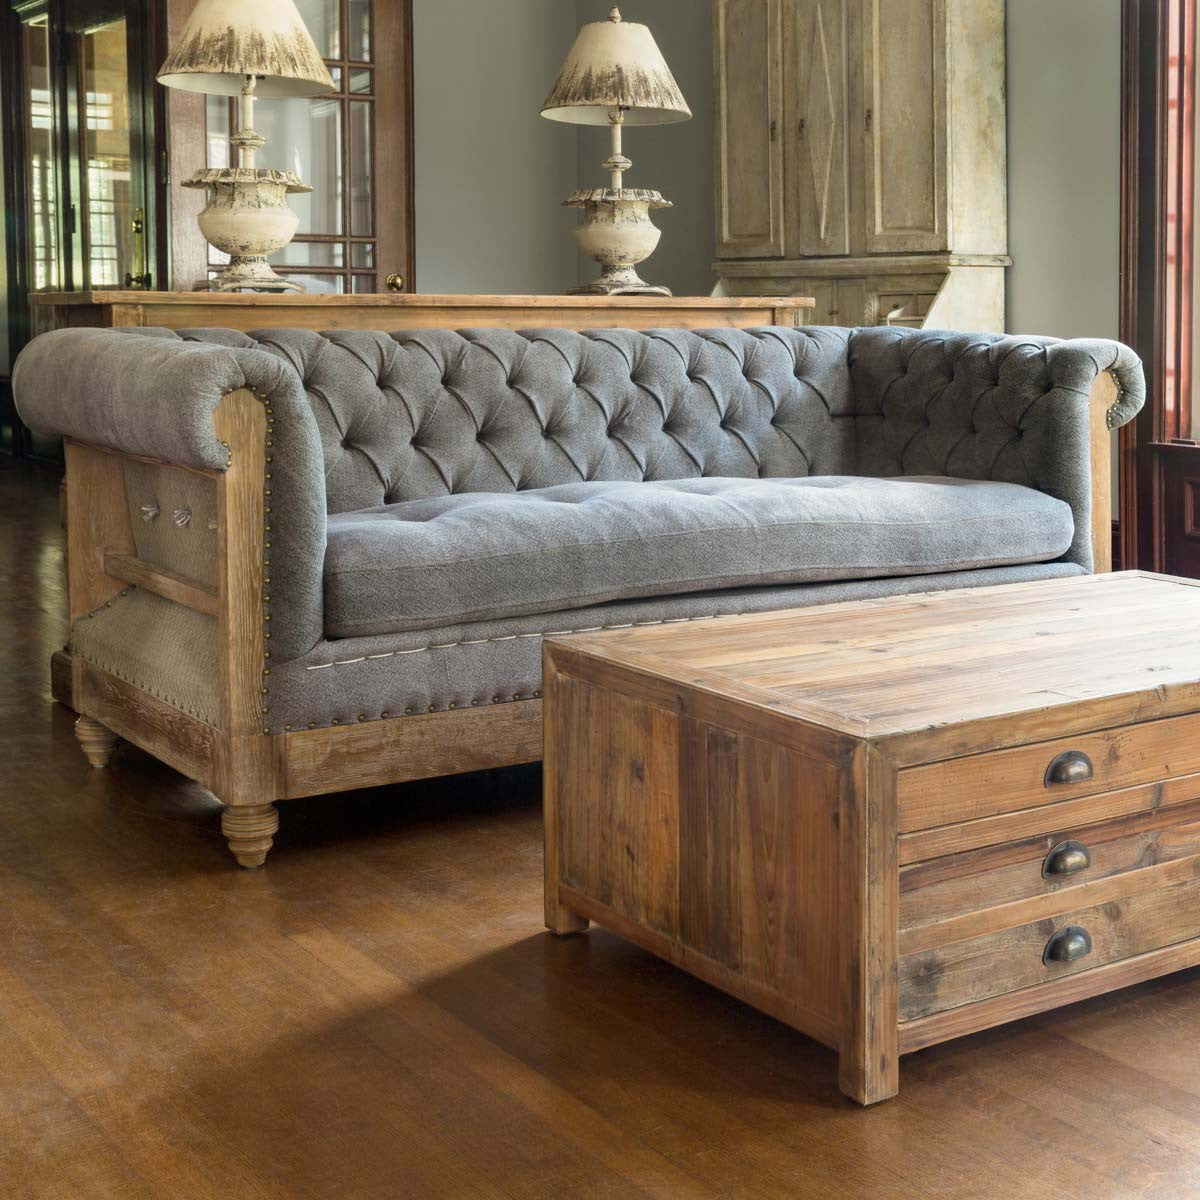 Capital Hotel Tufted Chesterfield Sofa & Chair Collection